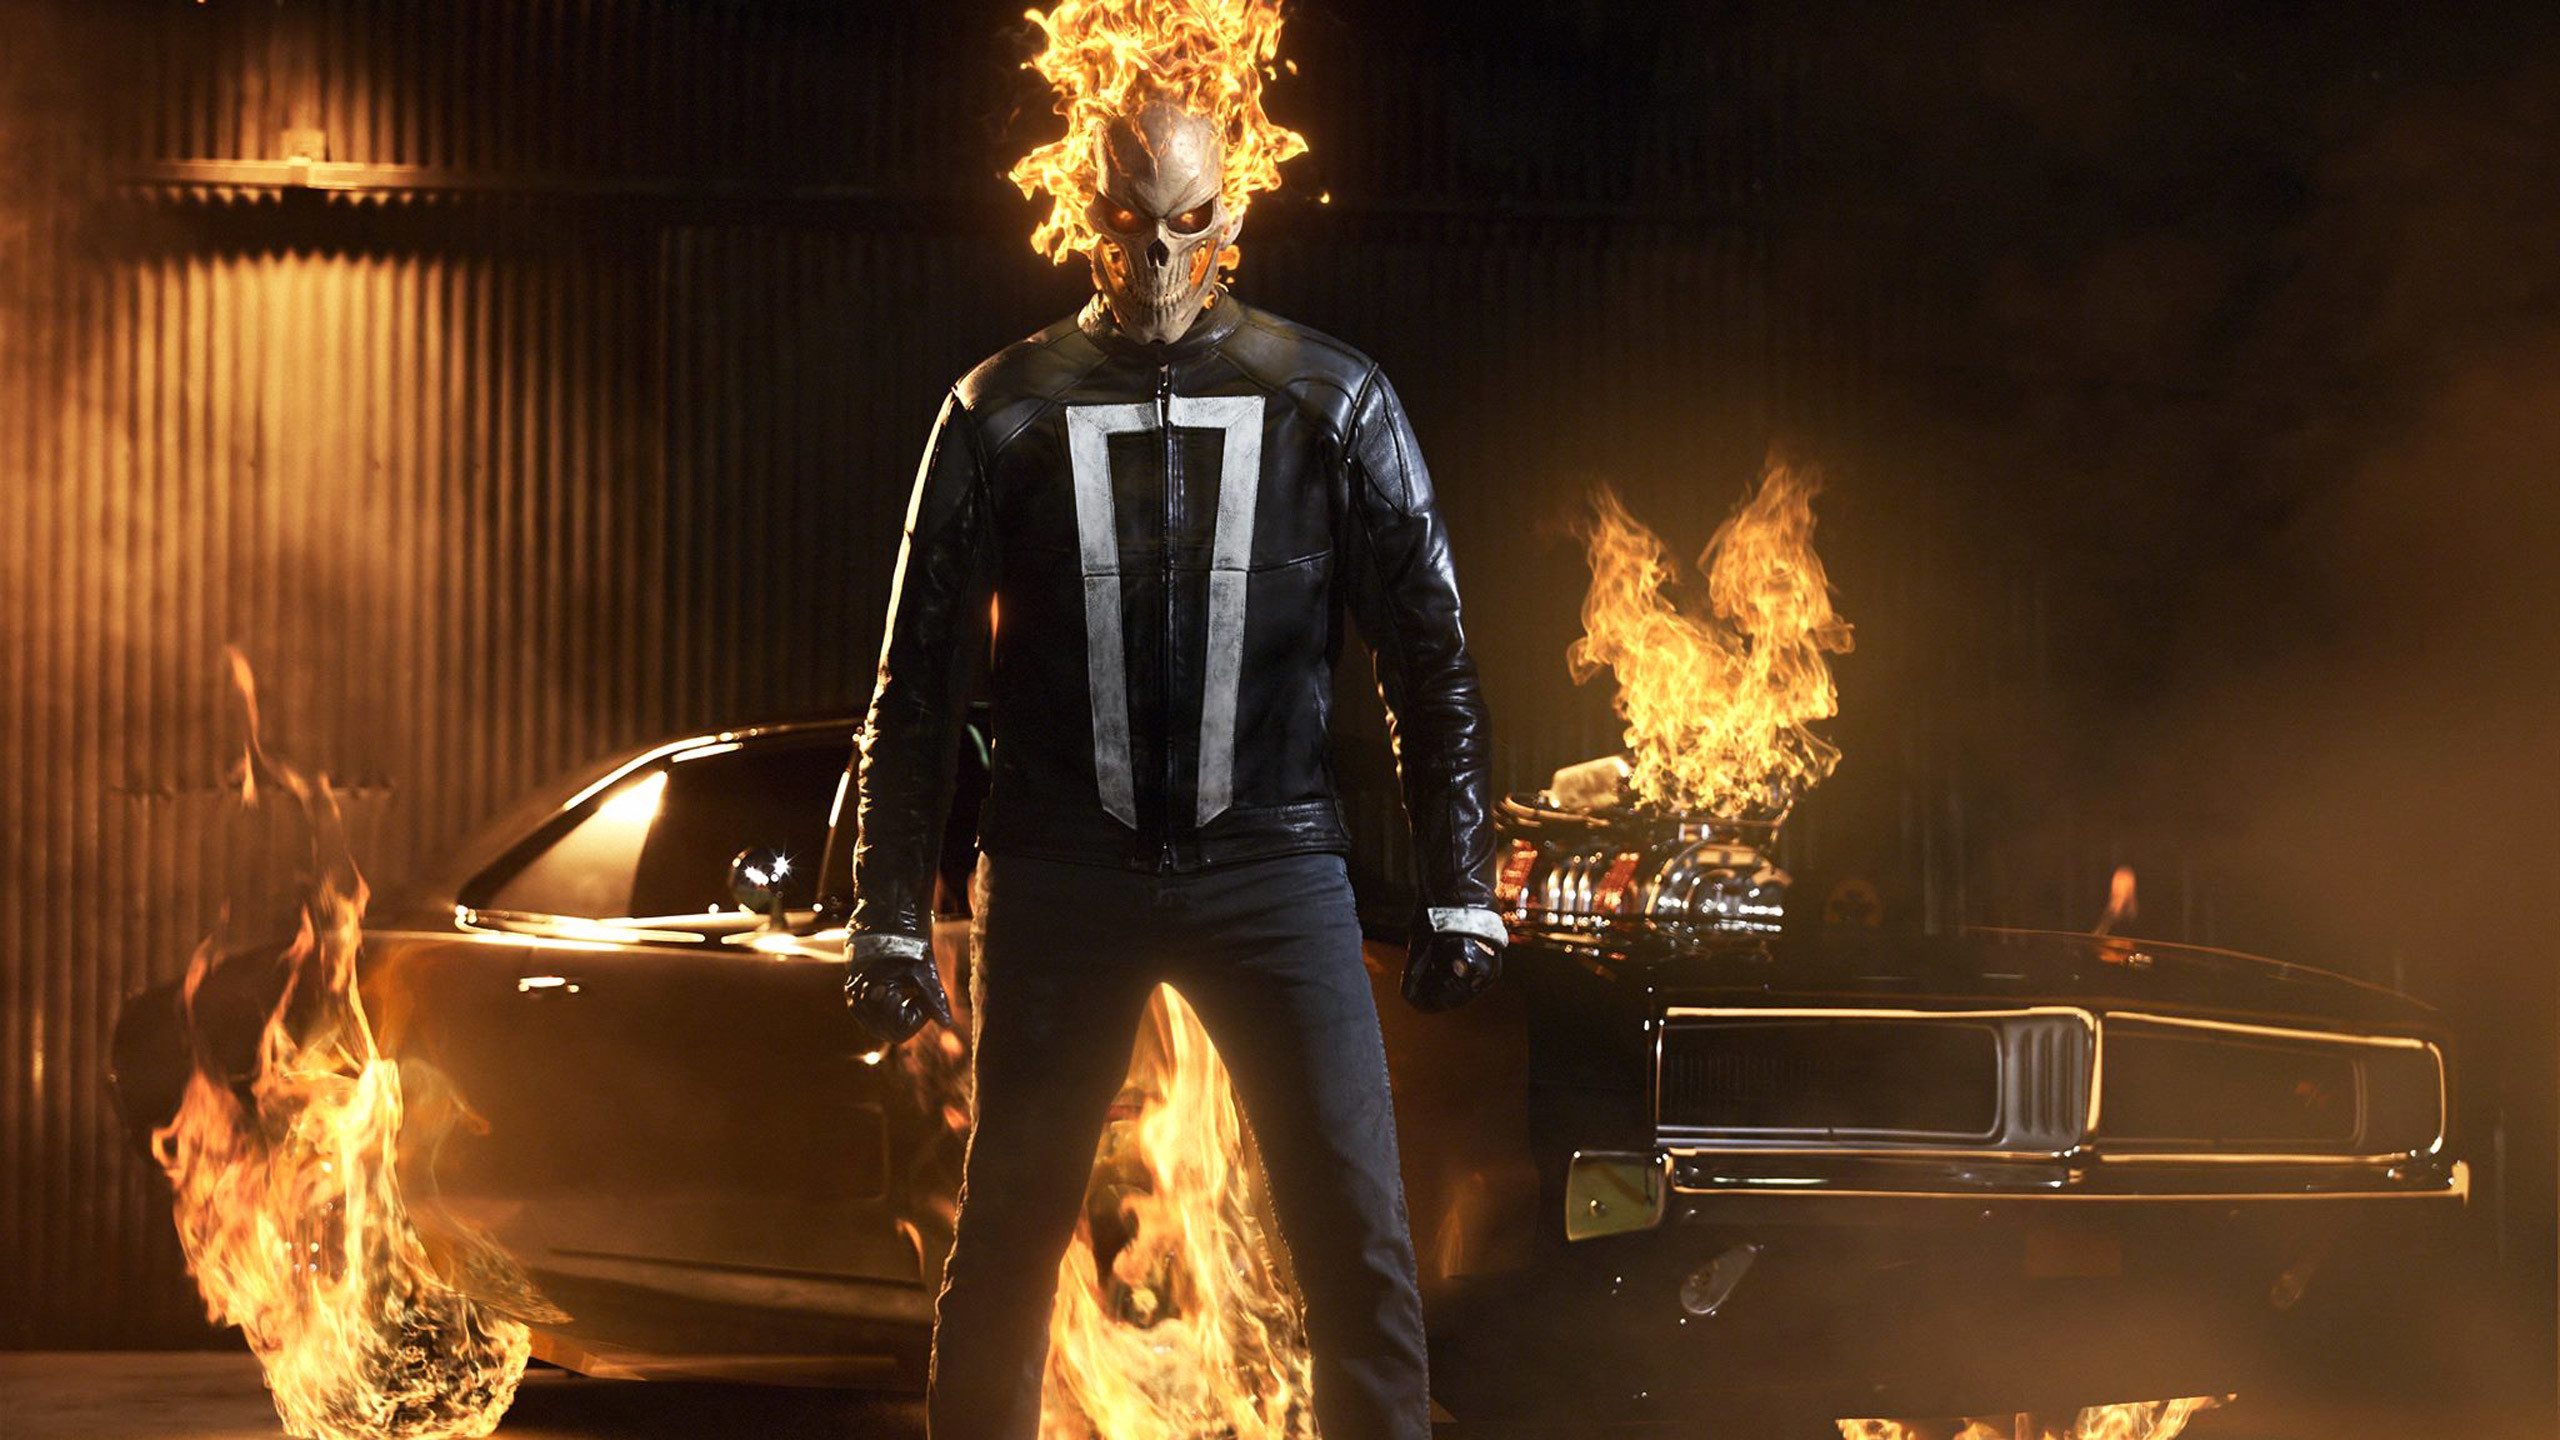 TV Series / Ghost Rider Wallpaper. Ghost Rider, Agents of SHIELD